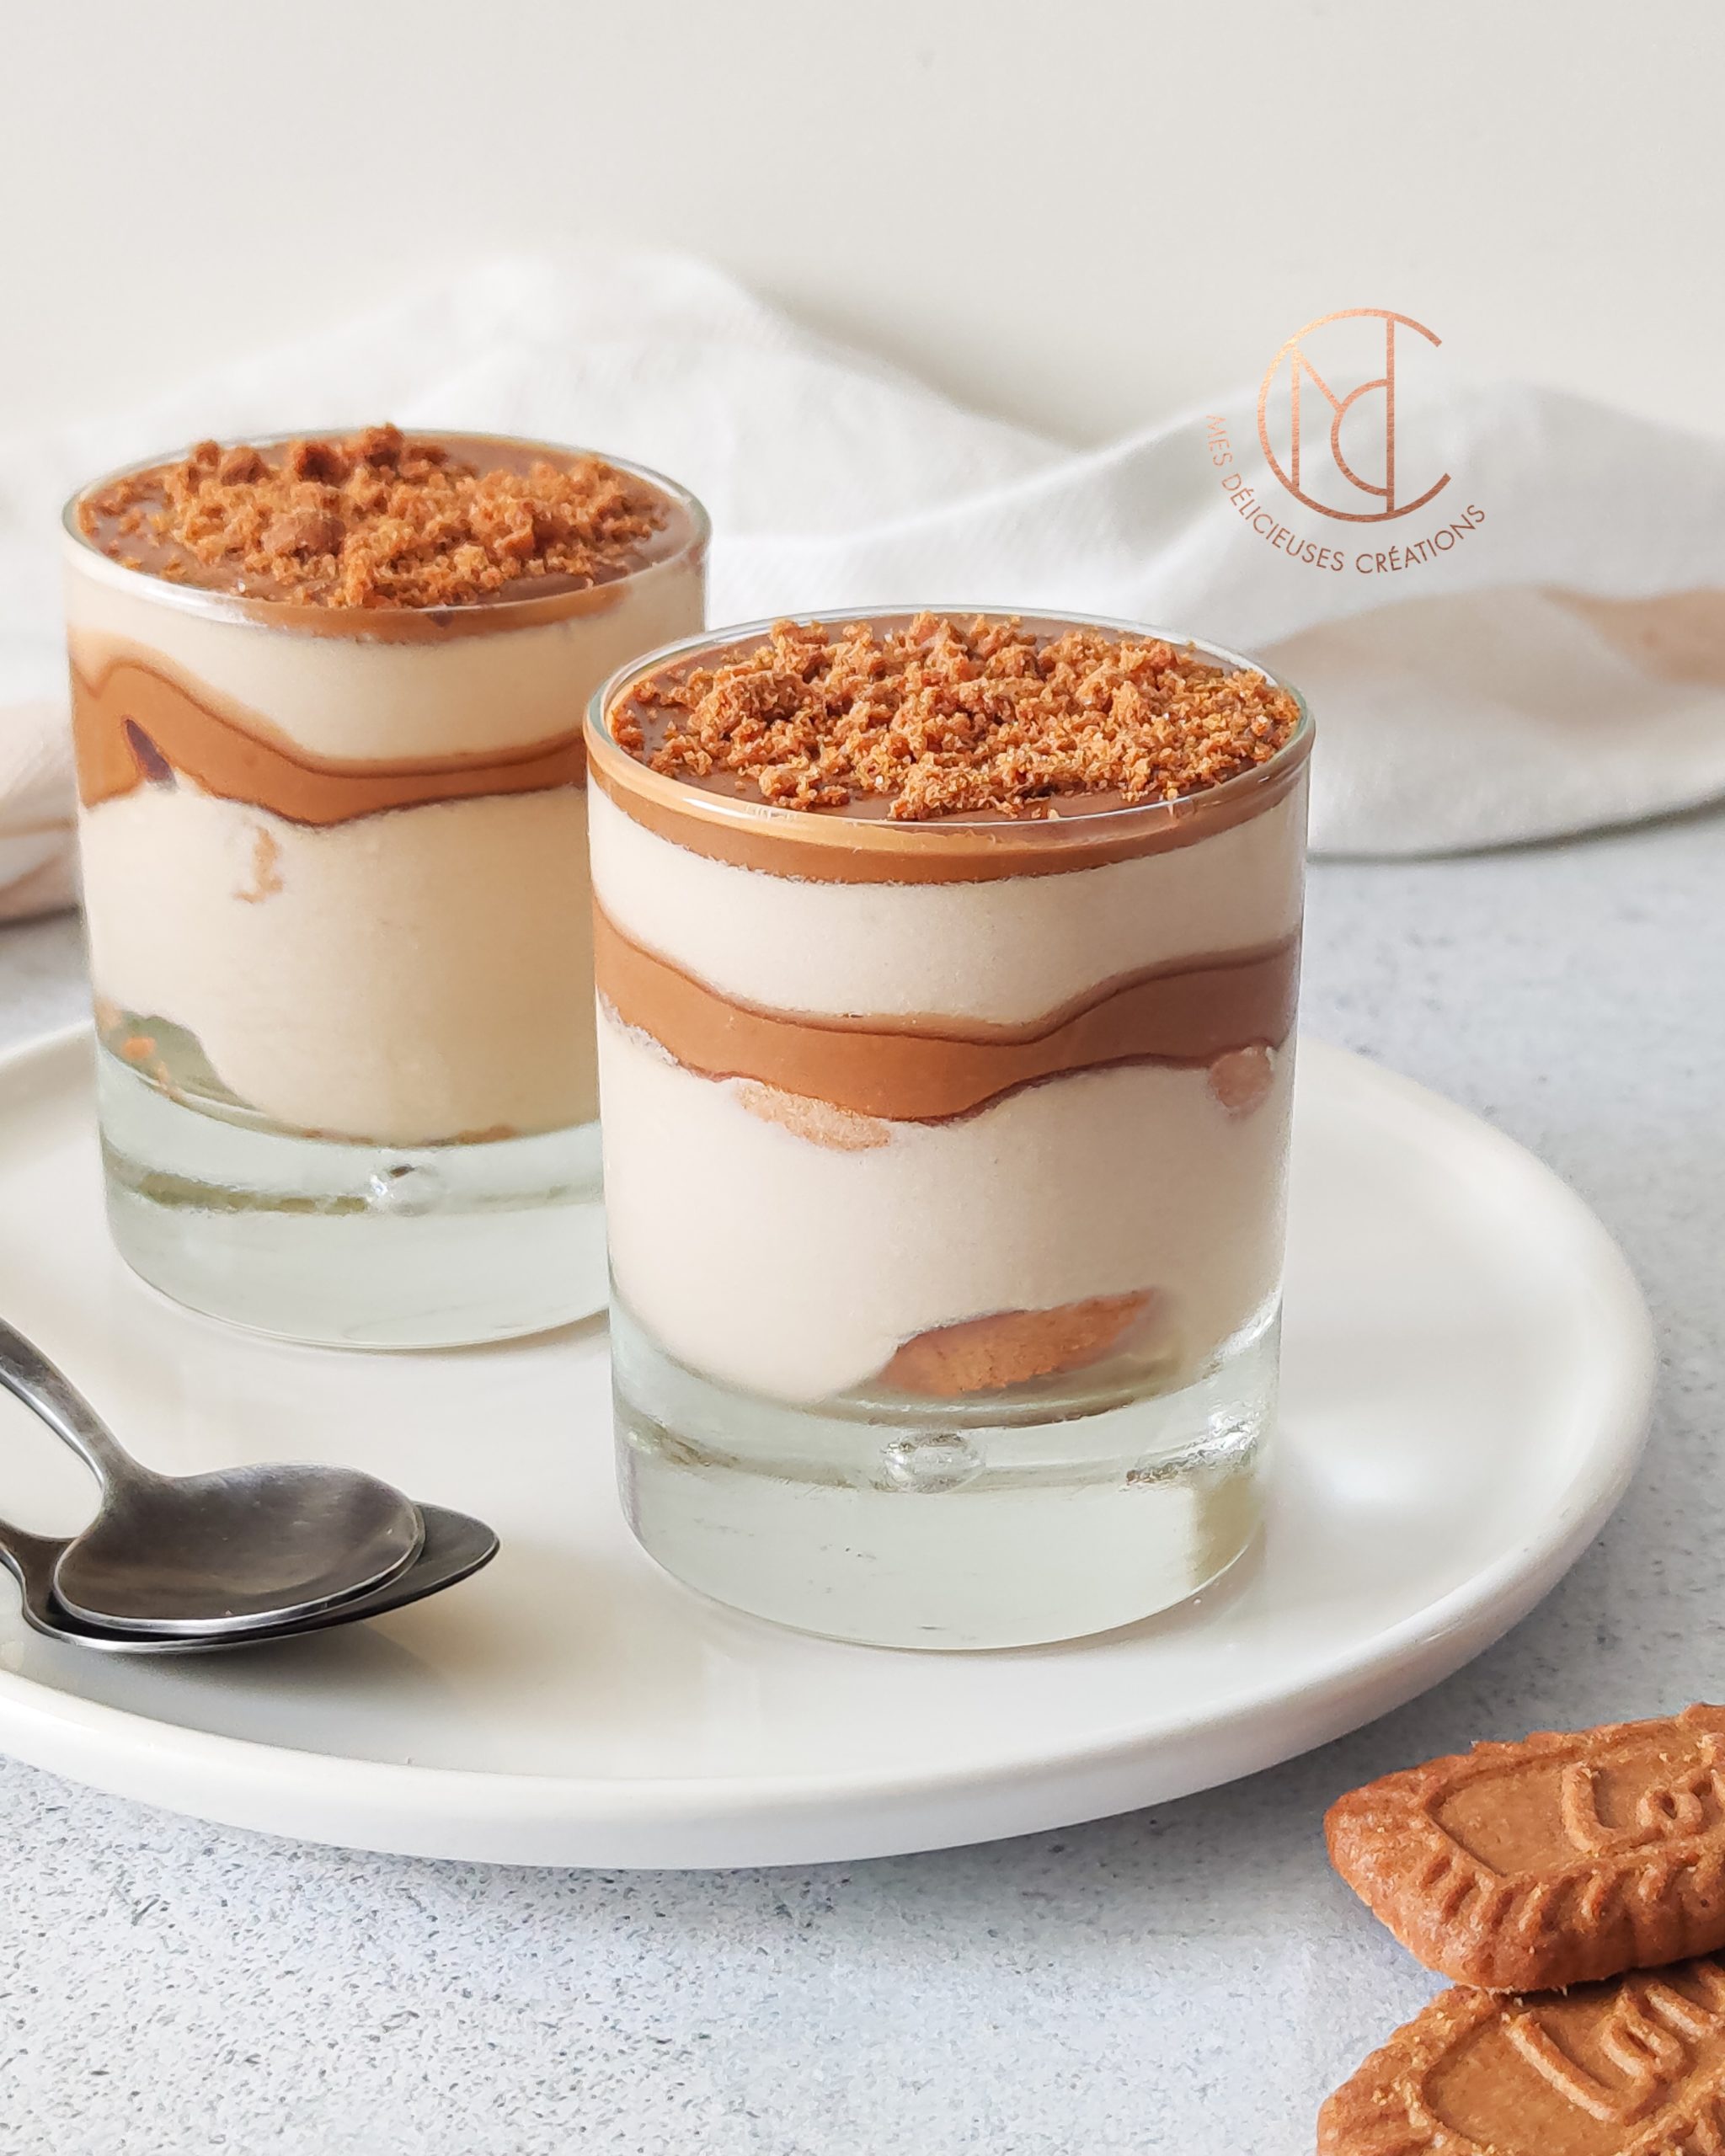 https://mesdelicieusescreations.com/wp-content/uploads/2021/06/verrines-speculoos-scaled.jpg